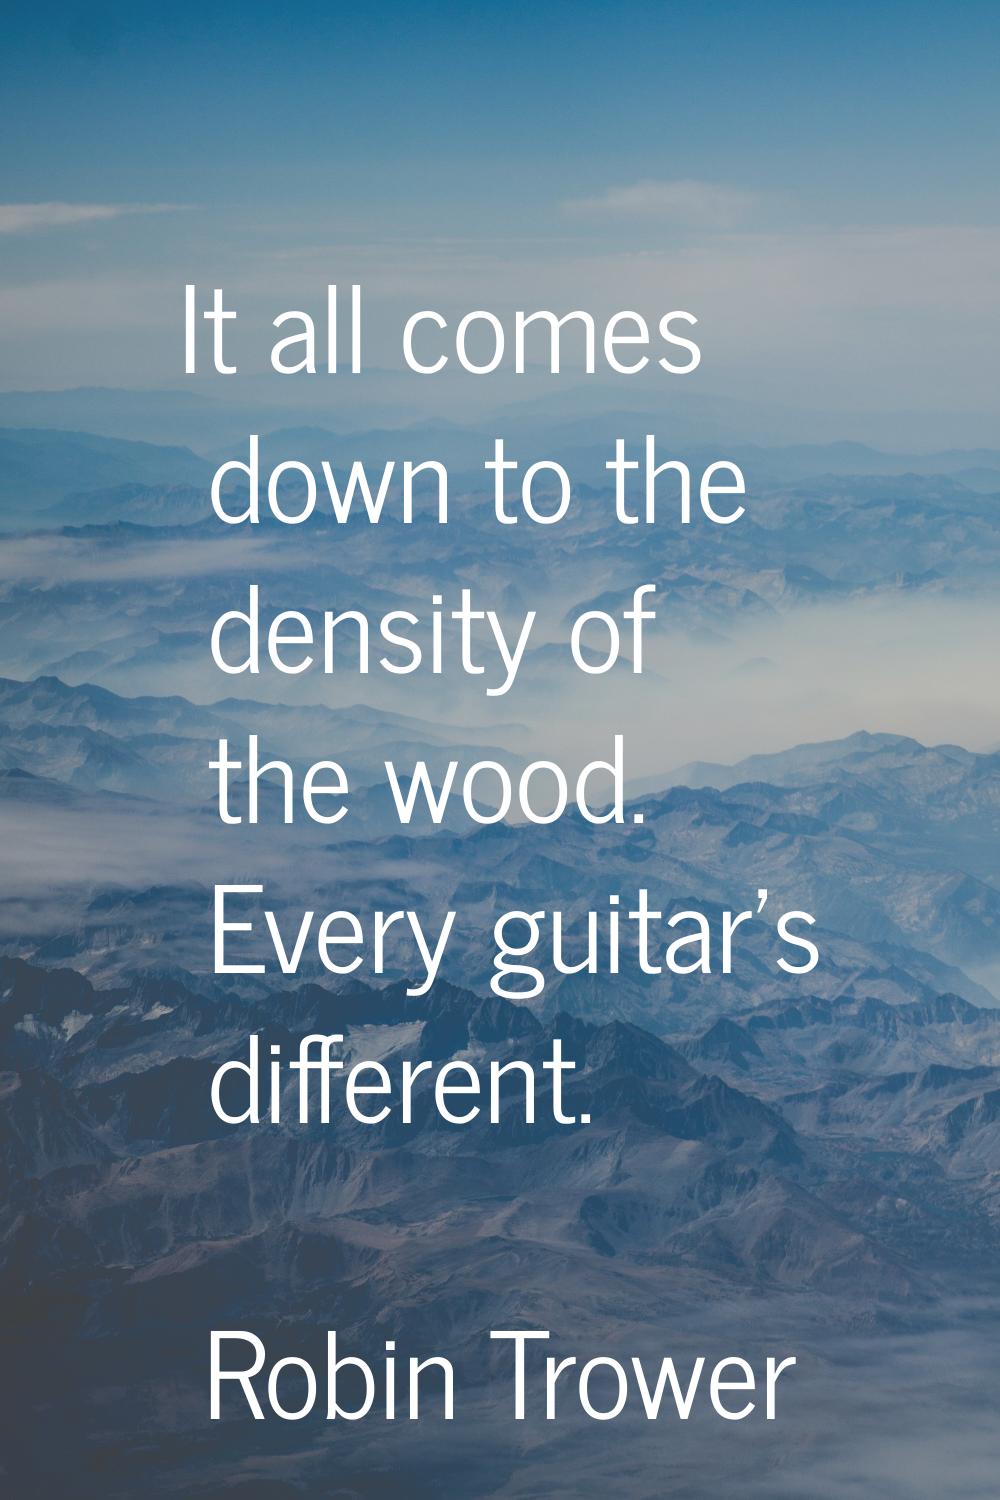 It all comes down to the density of the wood. Every guitar's different.